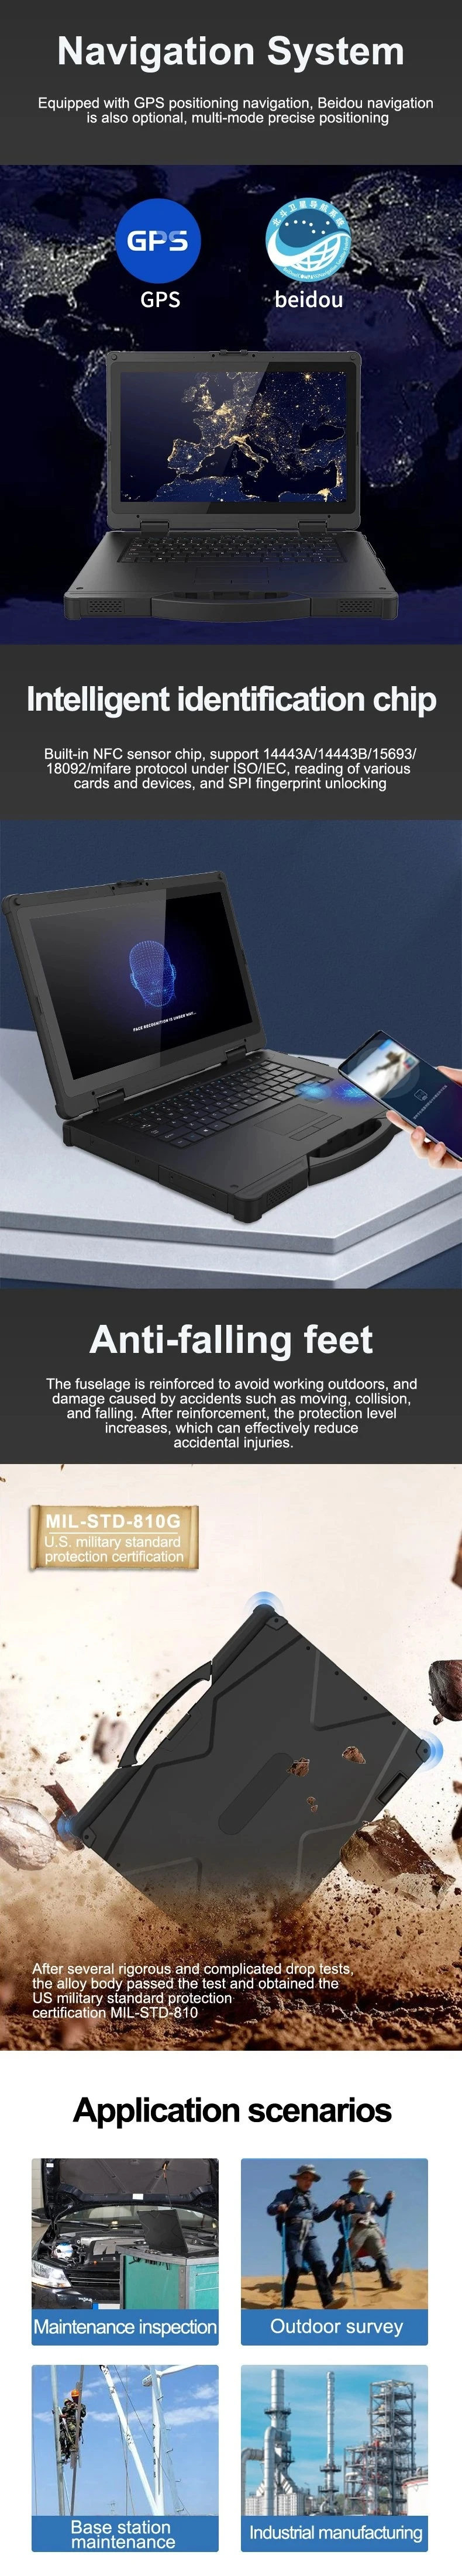 Big Rugged Laptop for Windows Supplier of 15 Inch Rugged Tablet